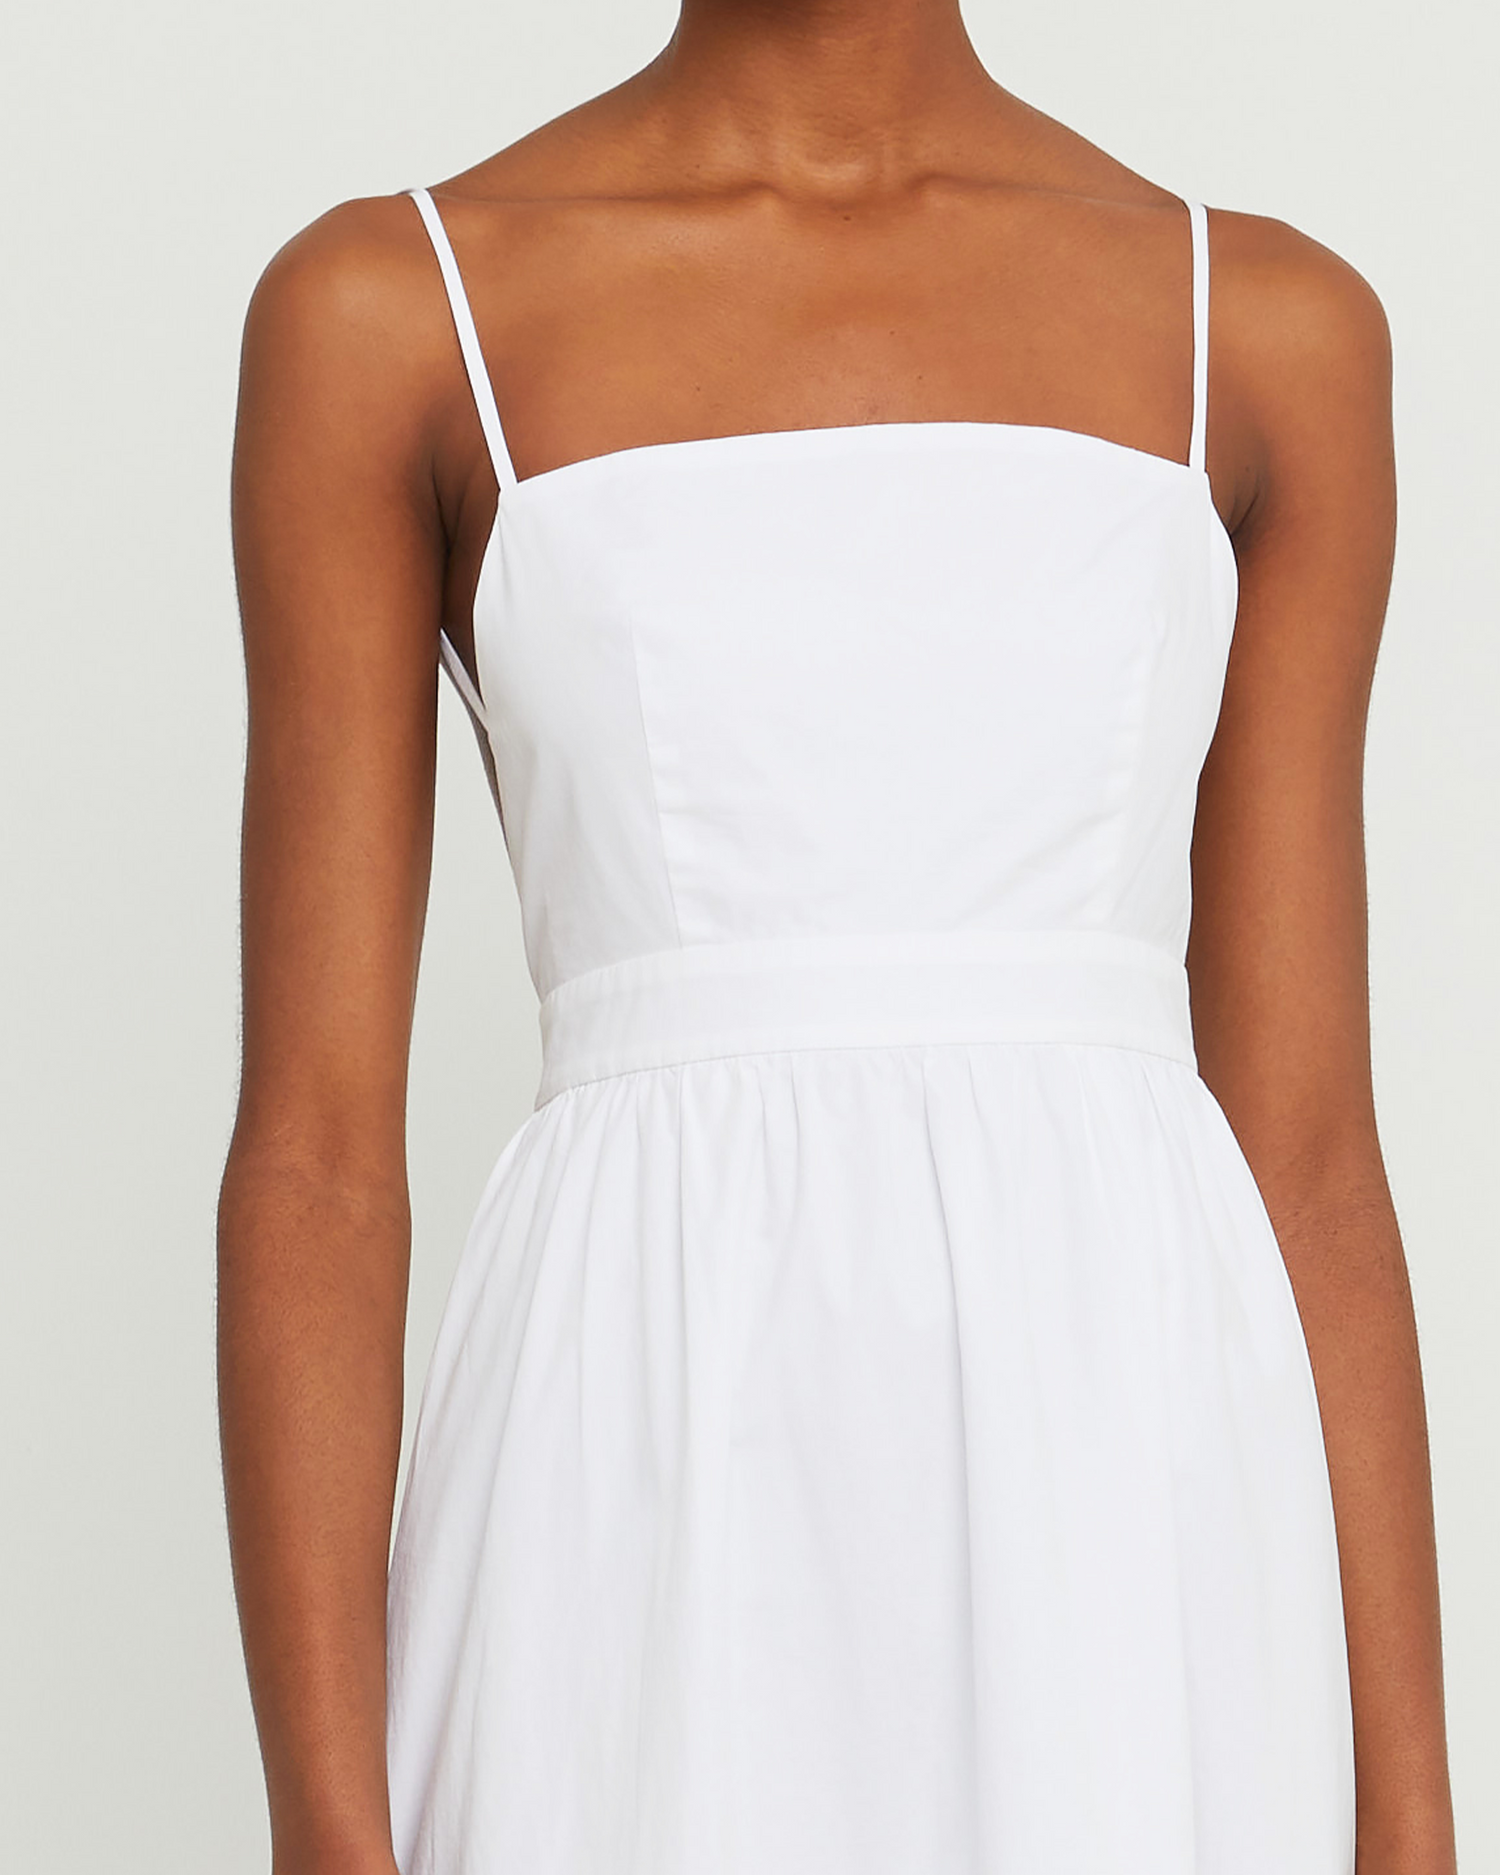 Fifth image of Dionne Cotton Dress, a white midi dress, spaghetti straps, high-low, high low skirt, maxi